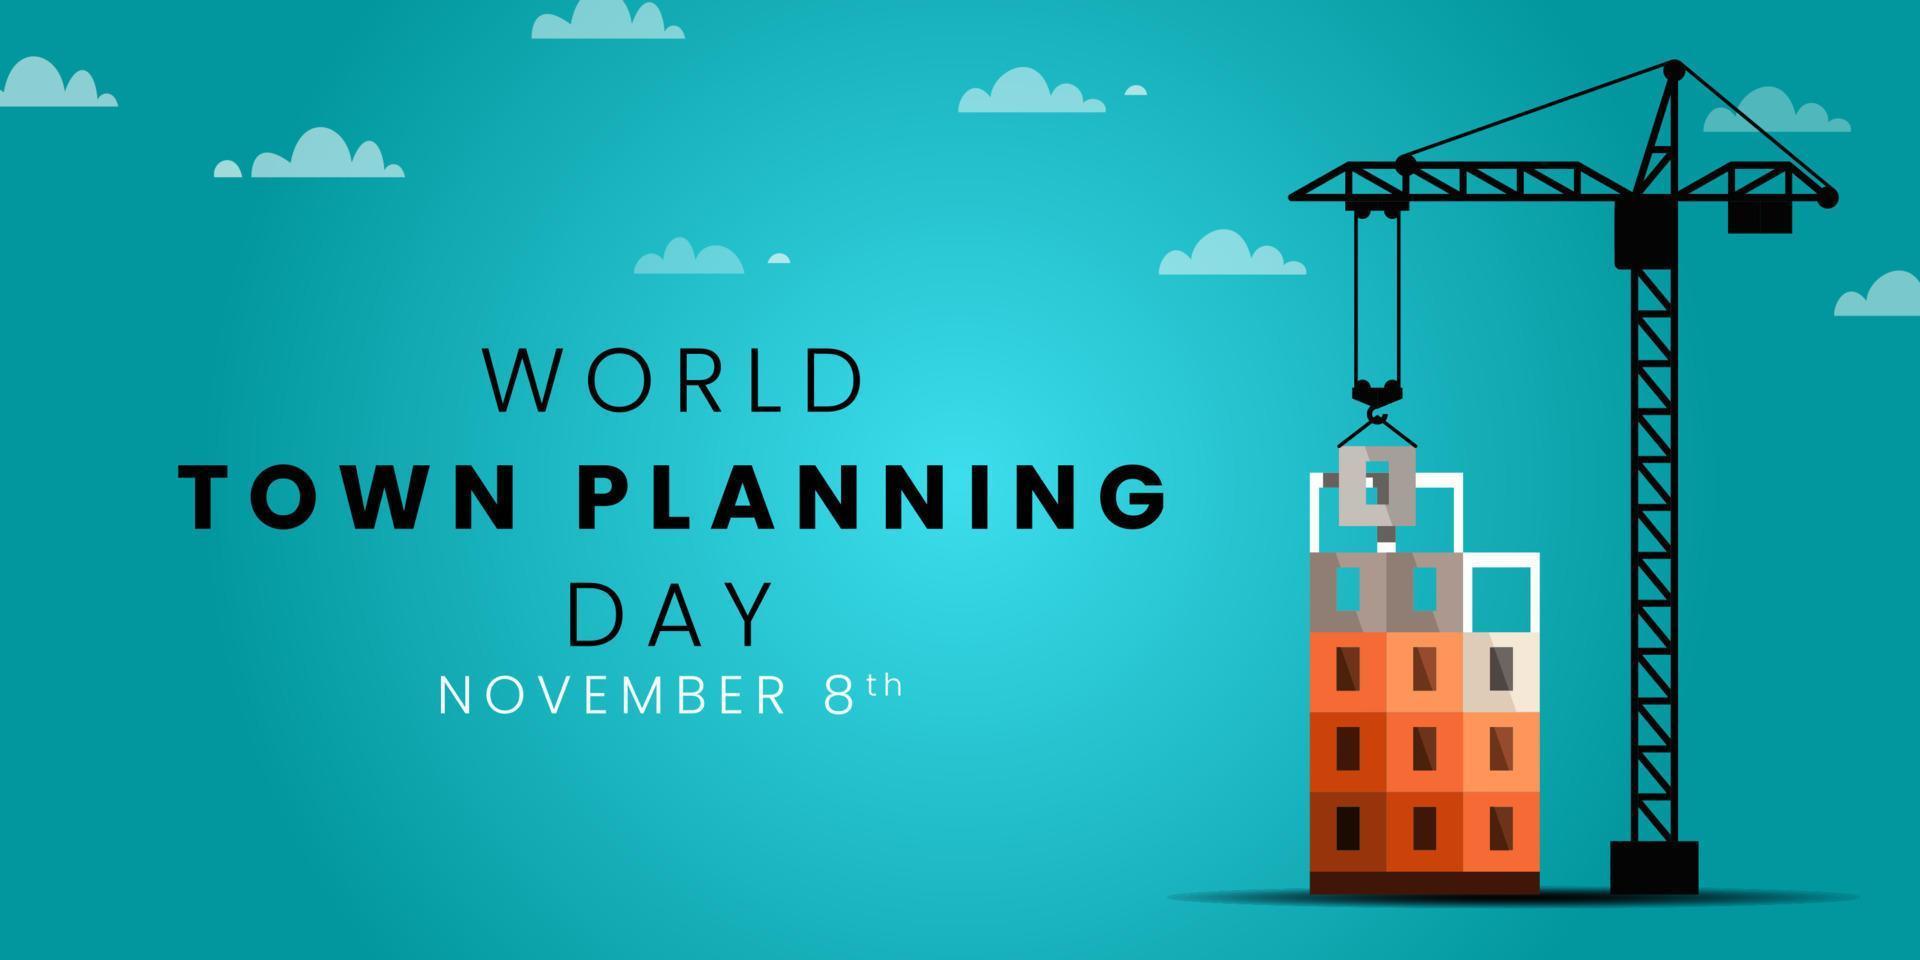 World Town Planning Day on November 08. Vector illustration of World Town Planning Day suitable for web banner, poster, card, pamflet and background.